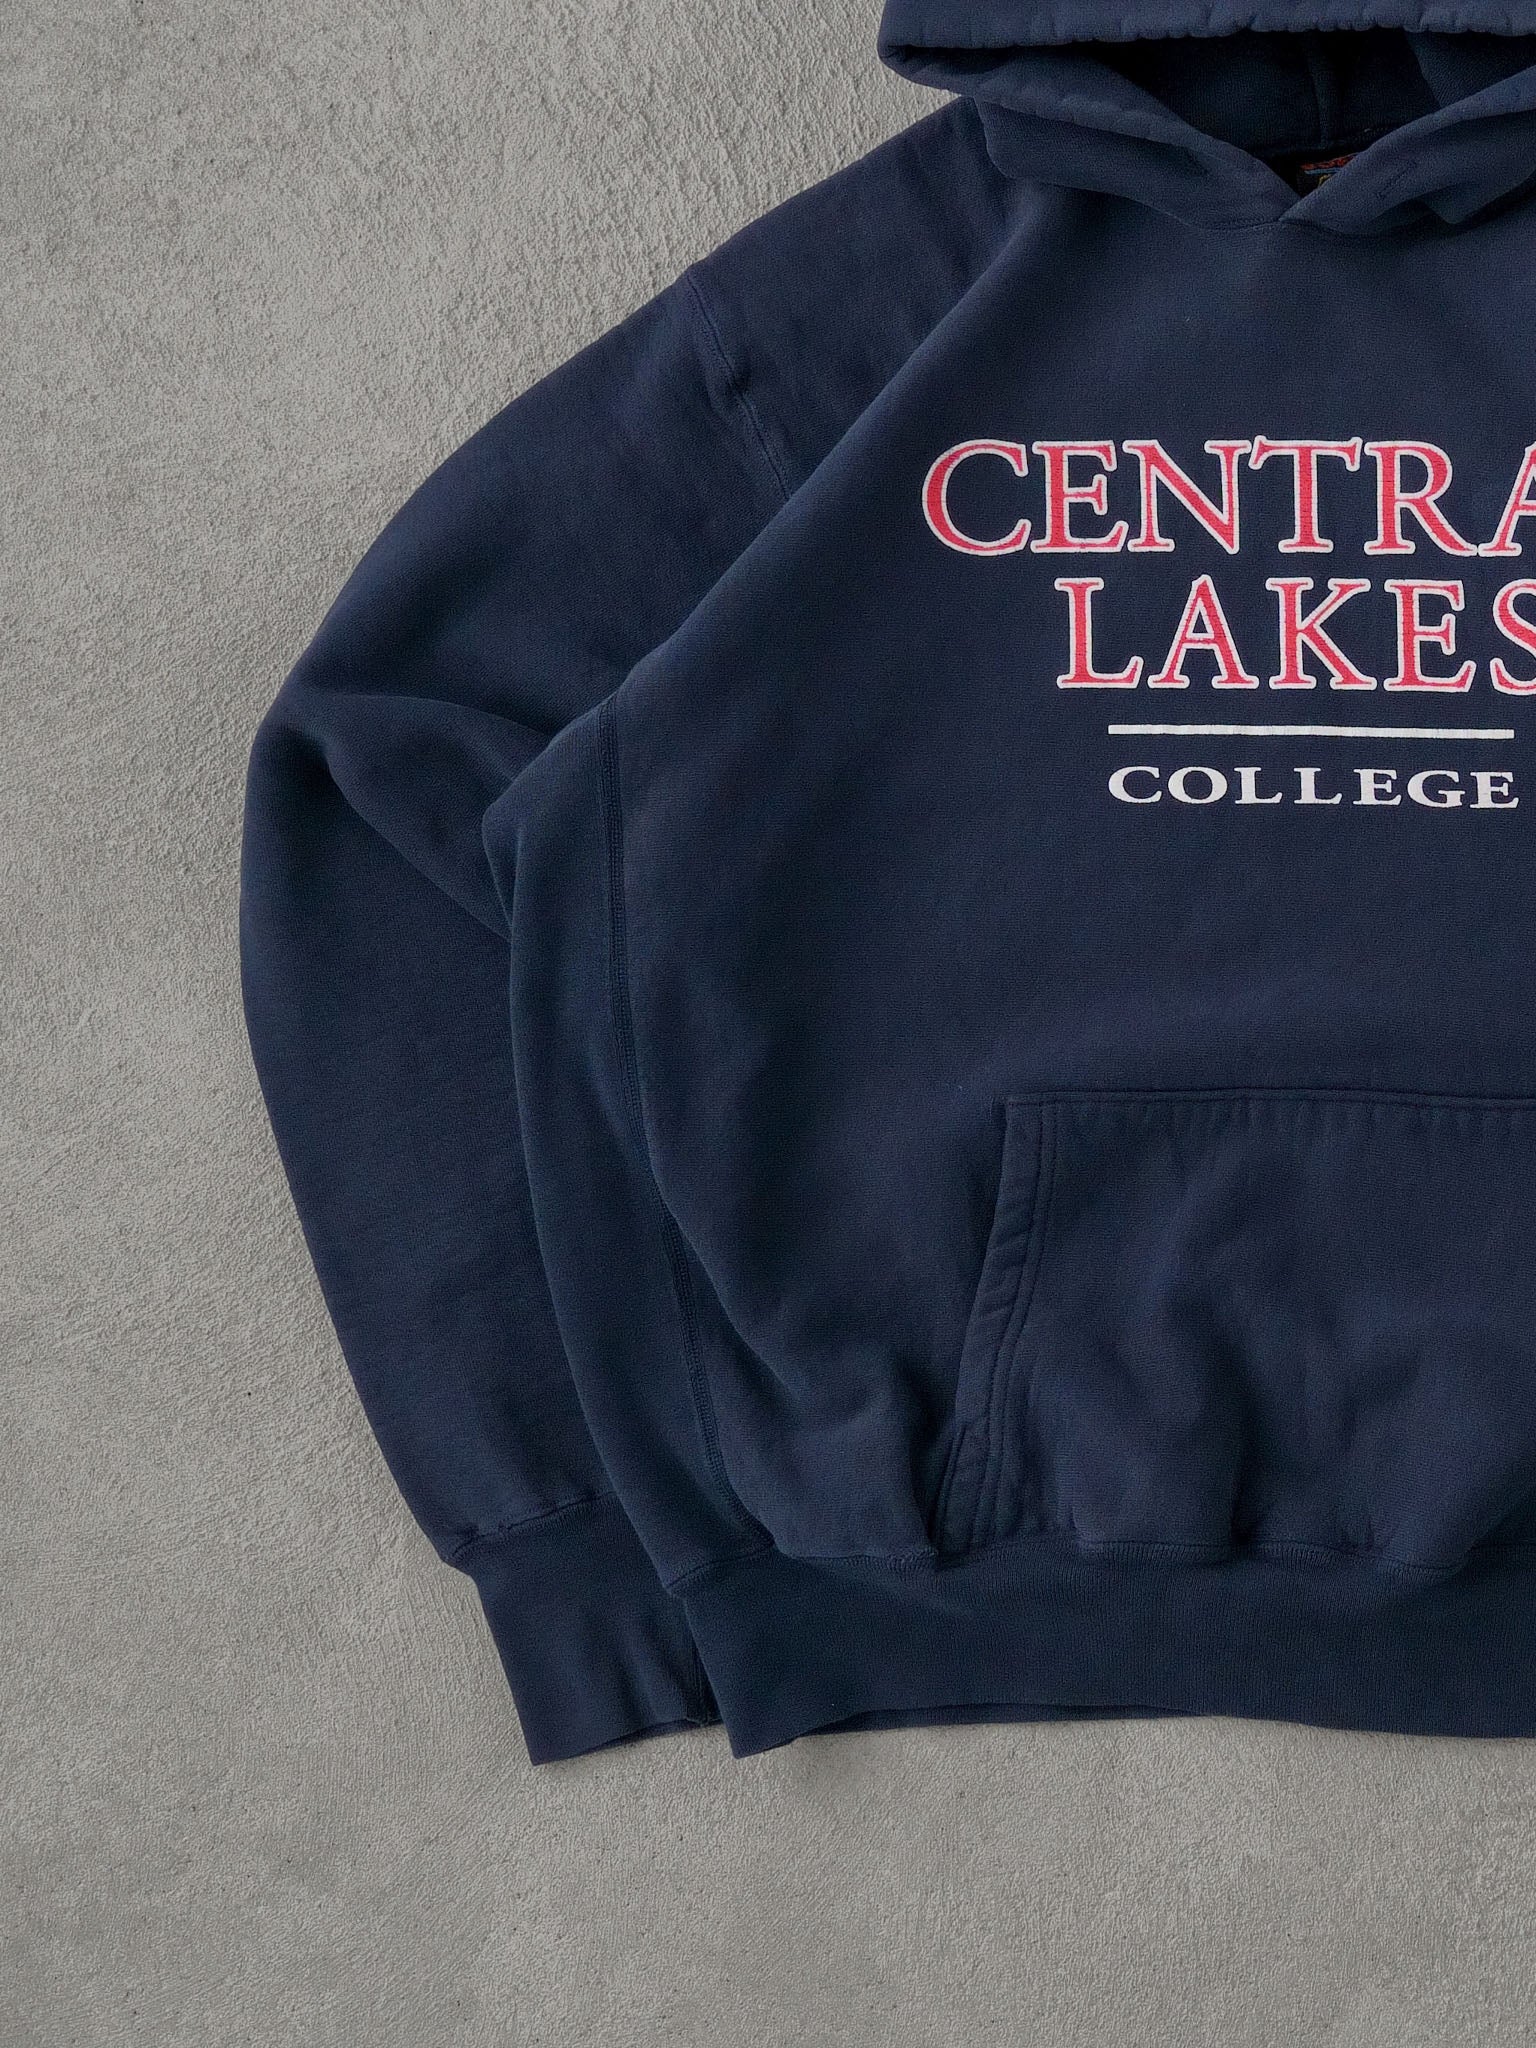 Vintage 90s Navy Blue Central Lakes College Hoodie (XL)